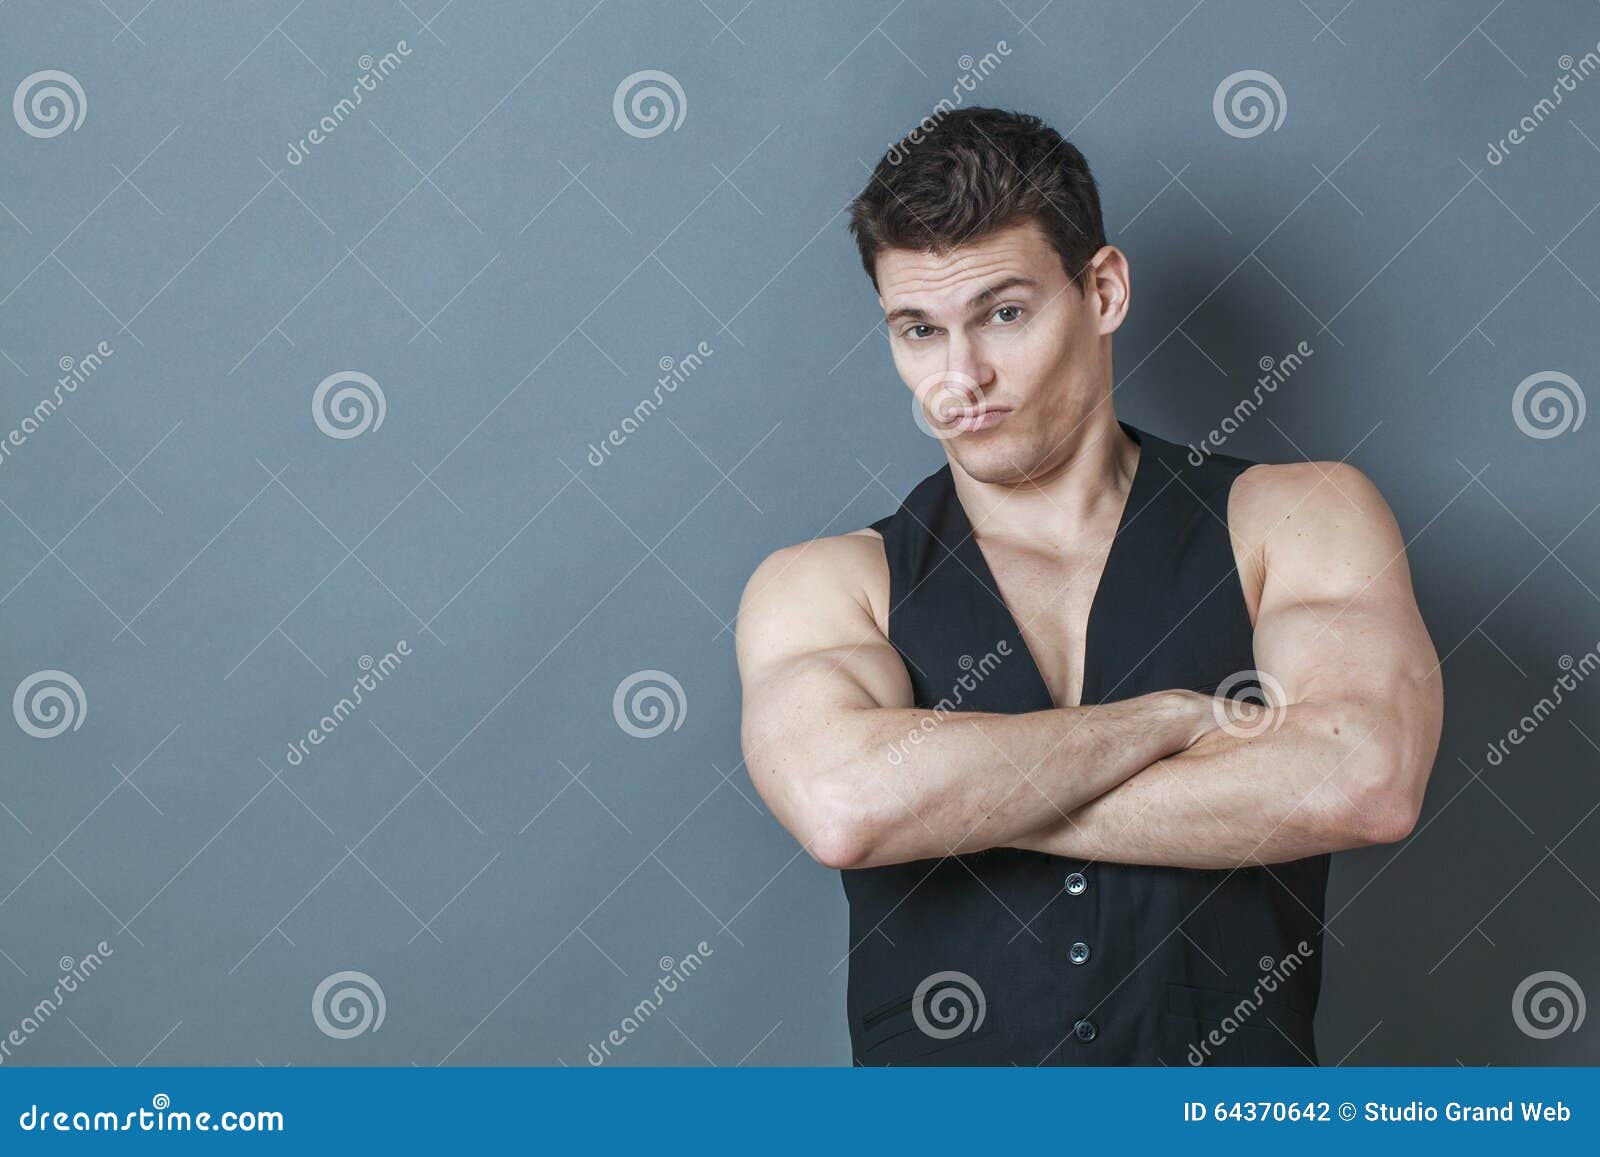 dubious young man showing his arrogant muscular strength